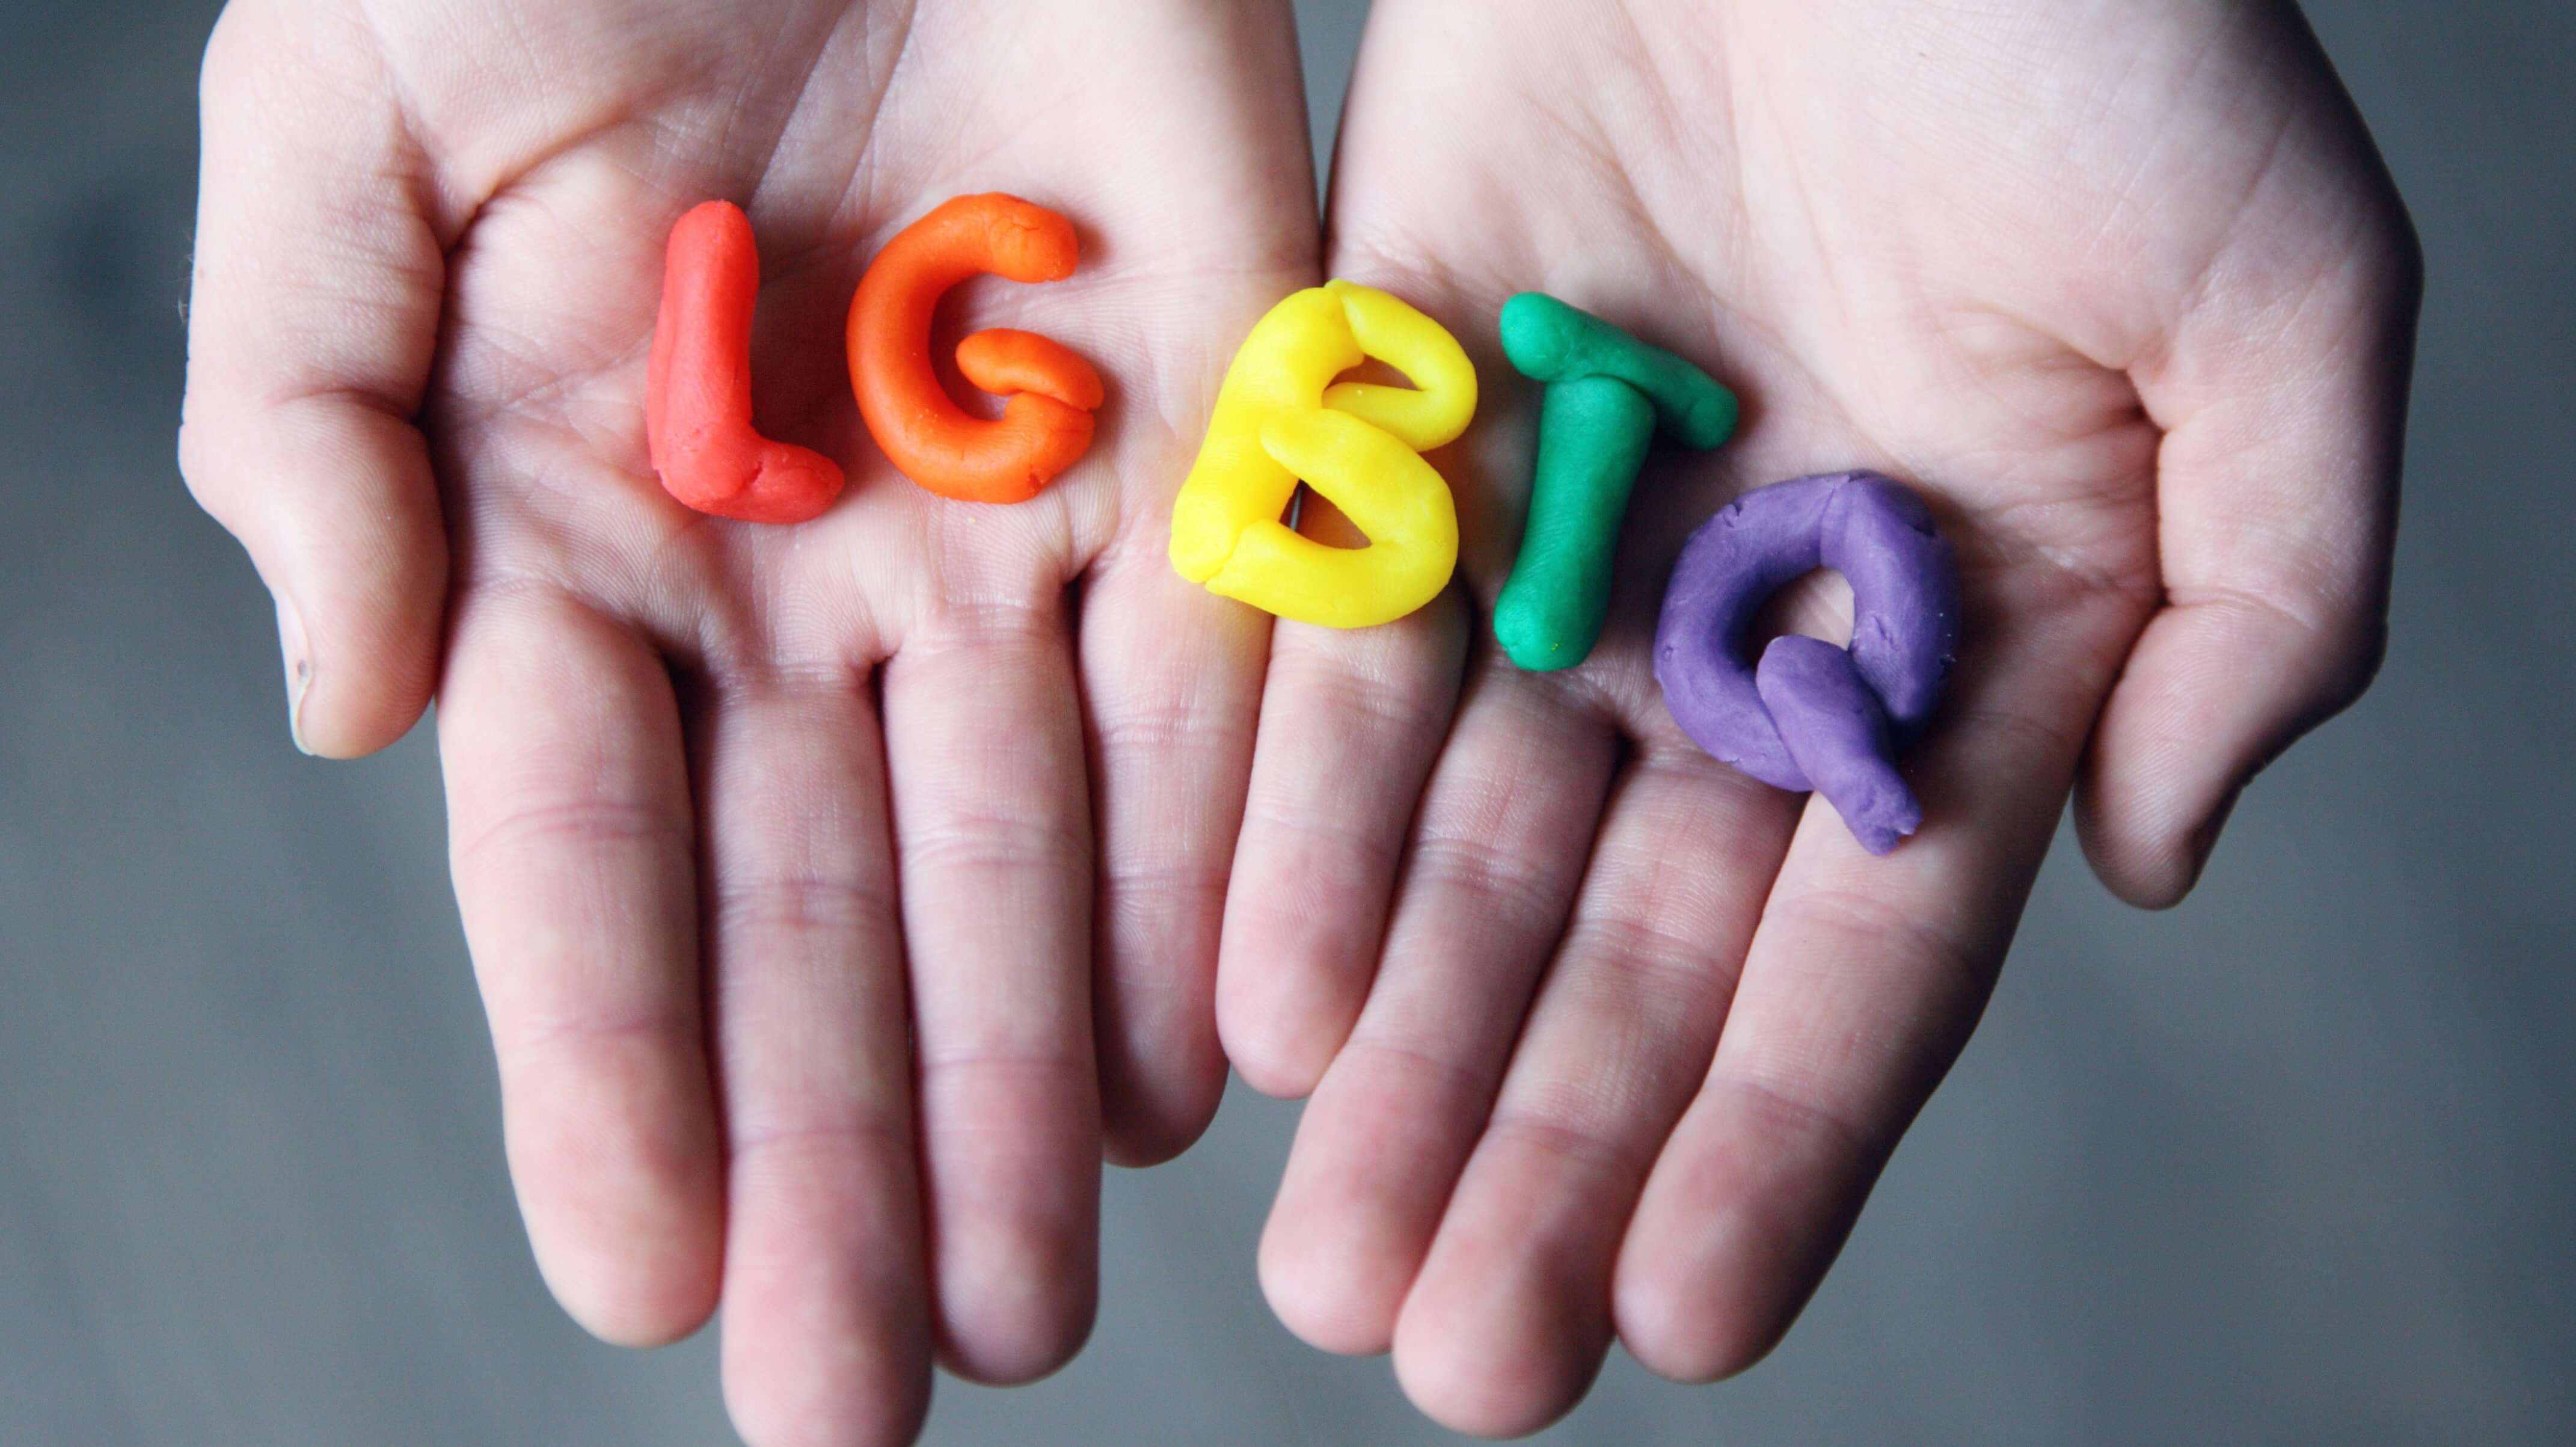 LGBT+ letter figures in a hand